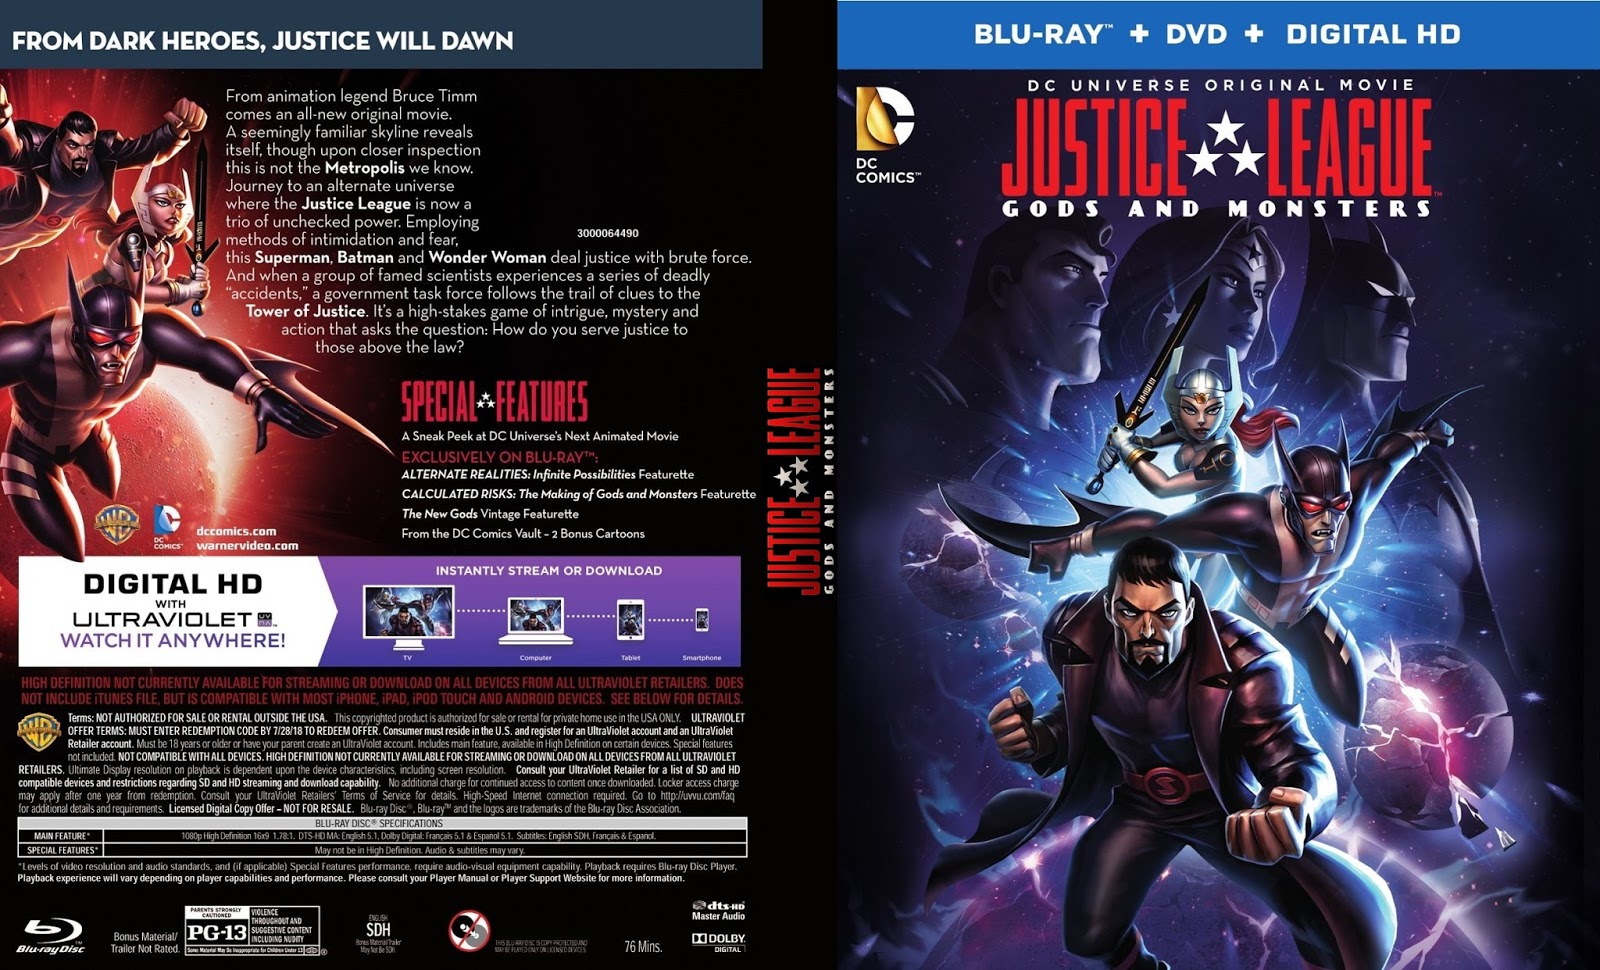 Justice League Gods and Monsters Bluray